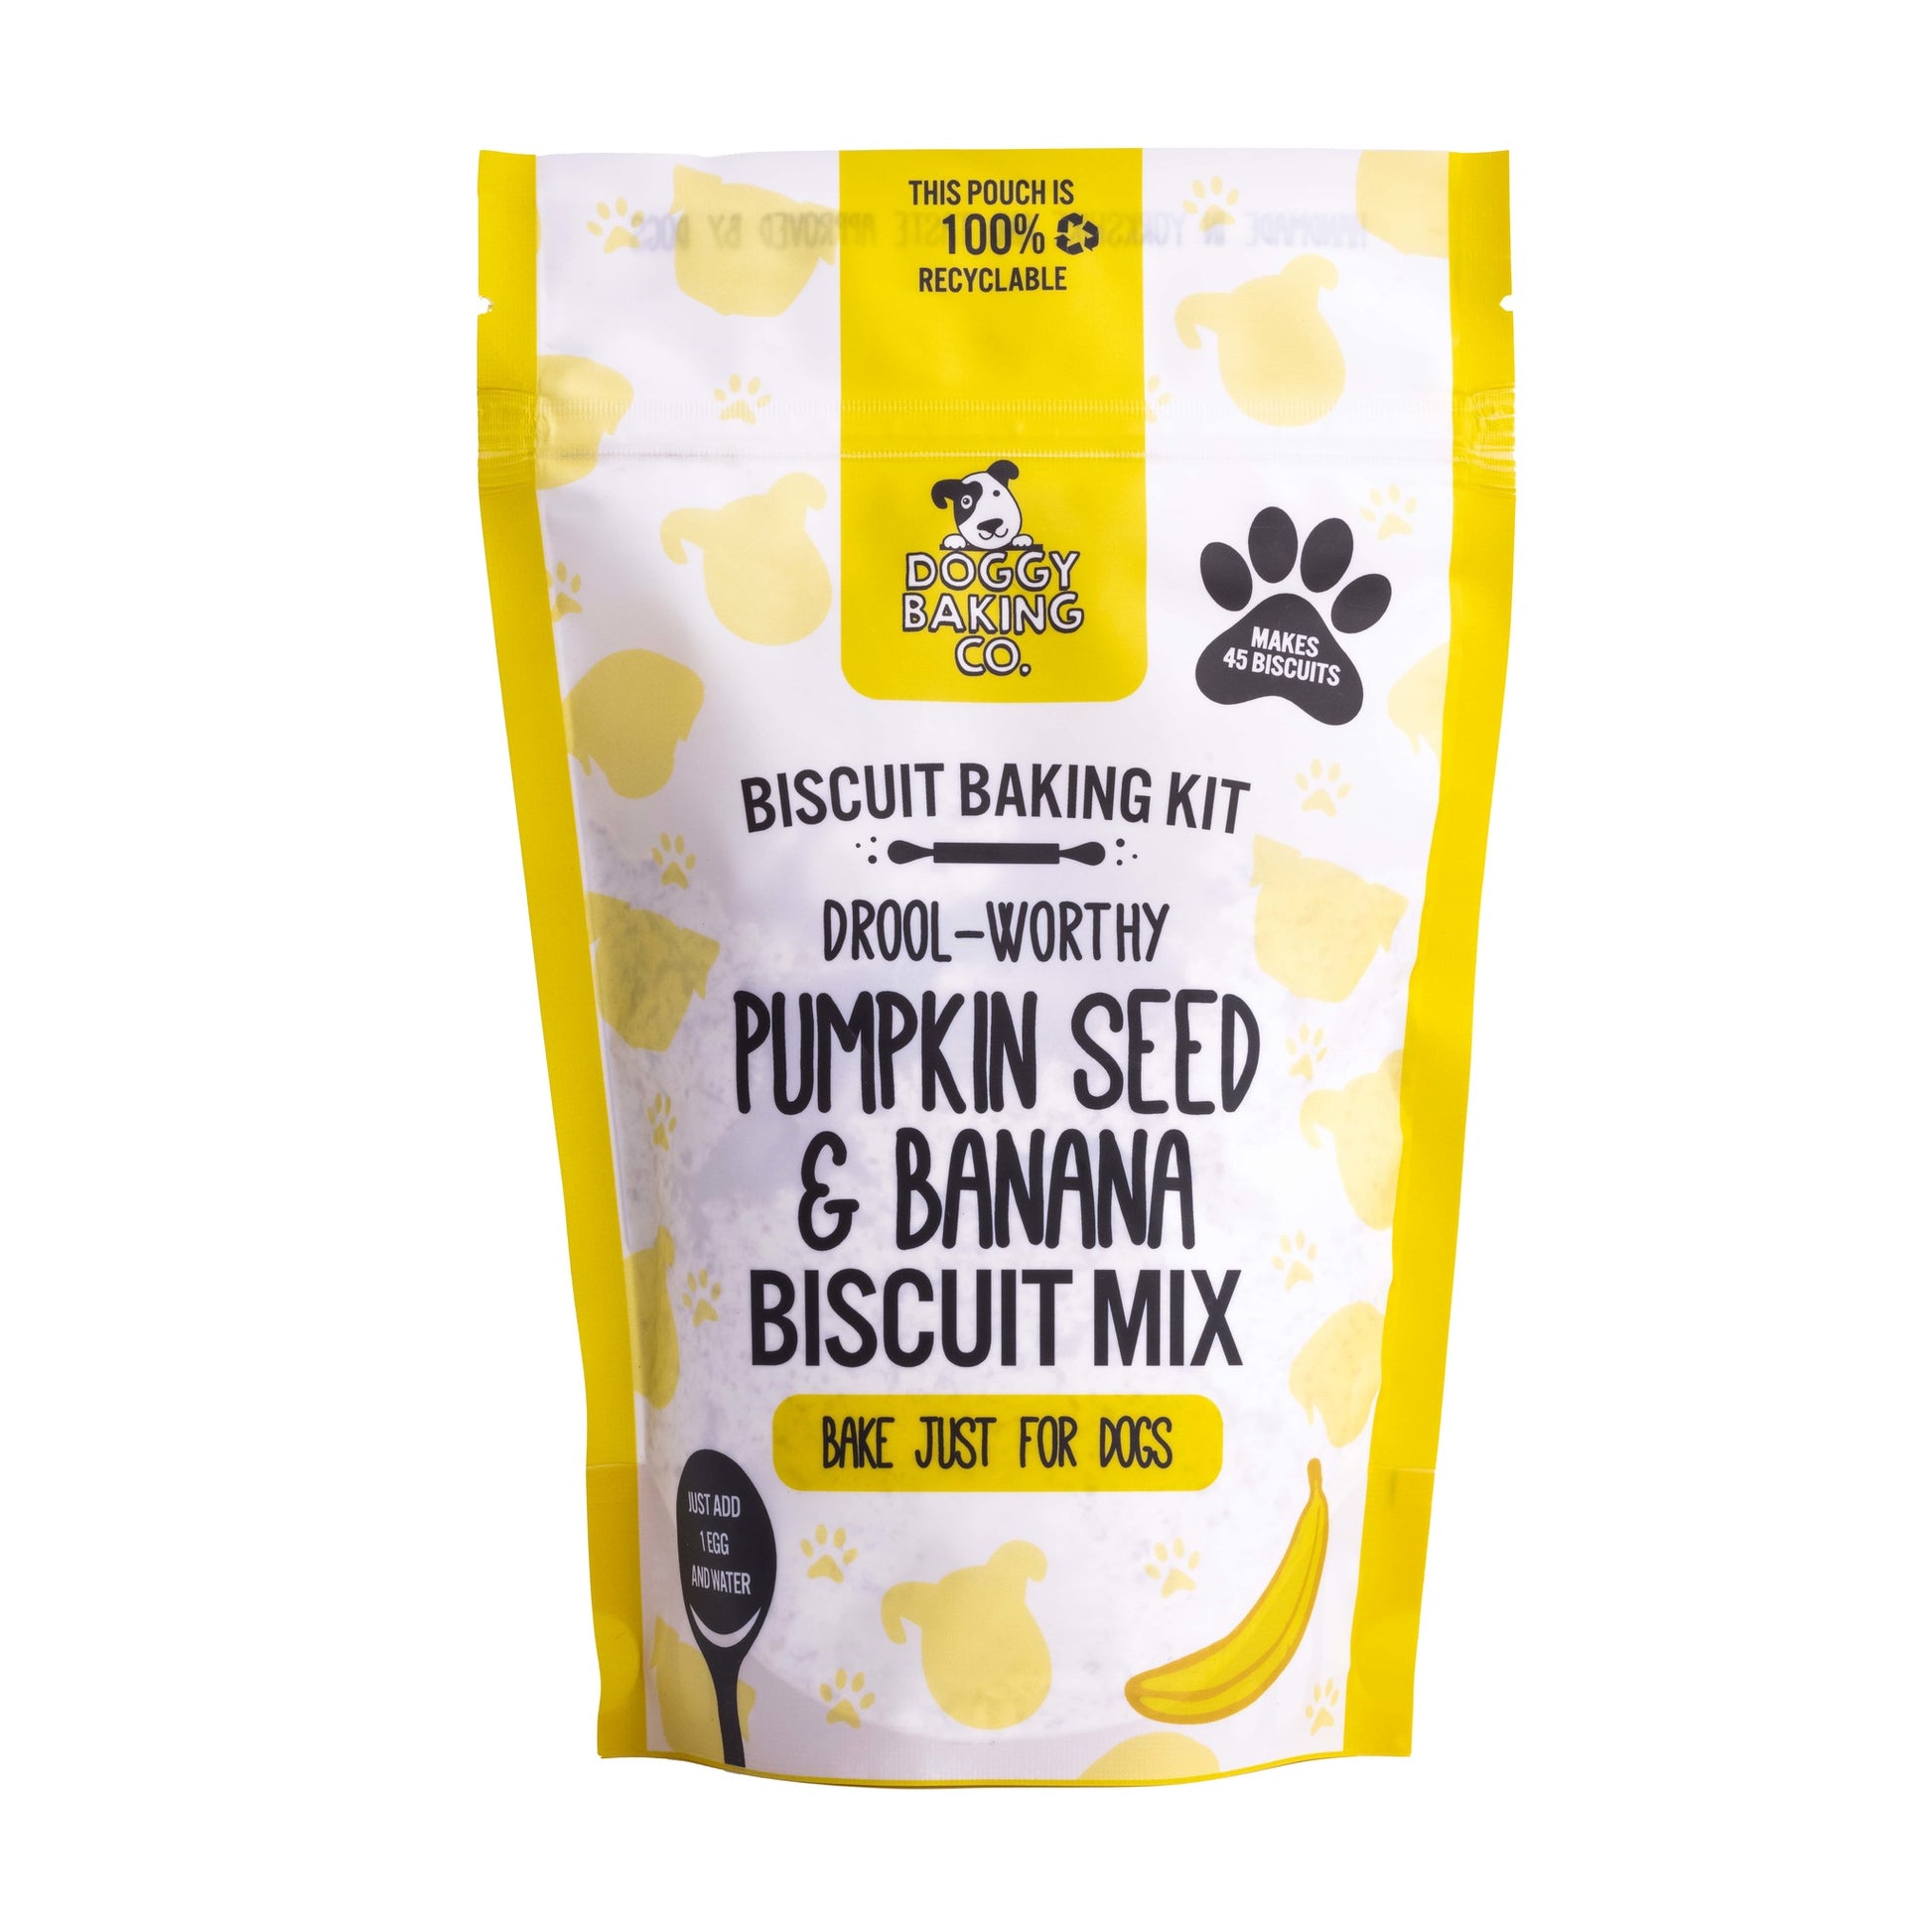 Pumpkin Seed & Banana Dog Treat Biscuit Mix in a Pouch - Doggy Baking Co by The Bottled Baking Co